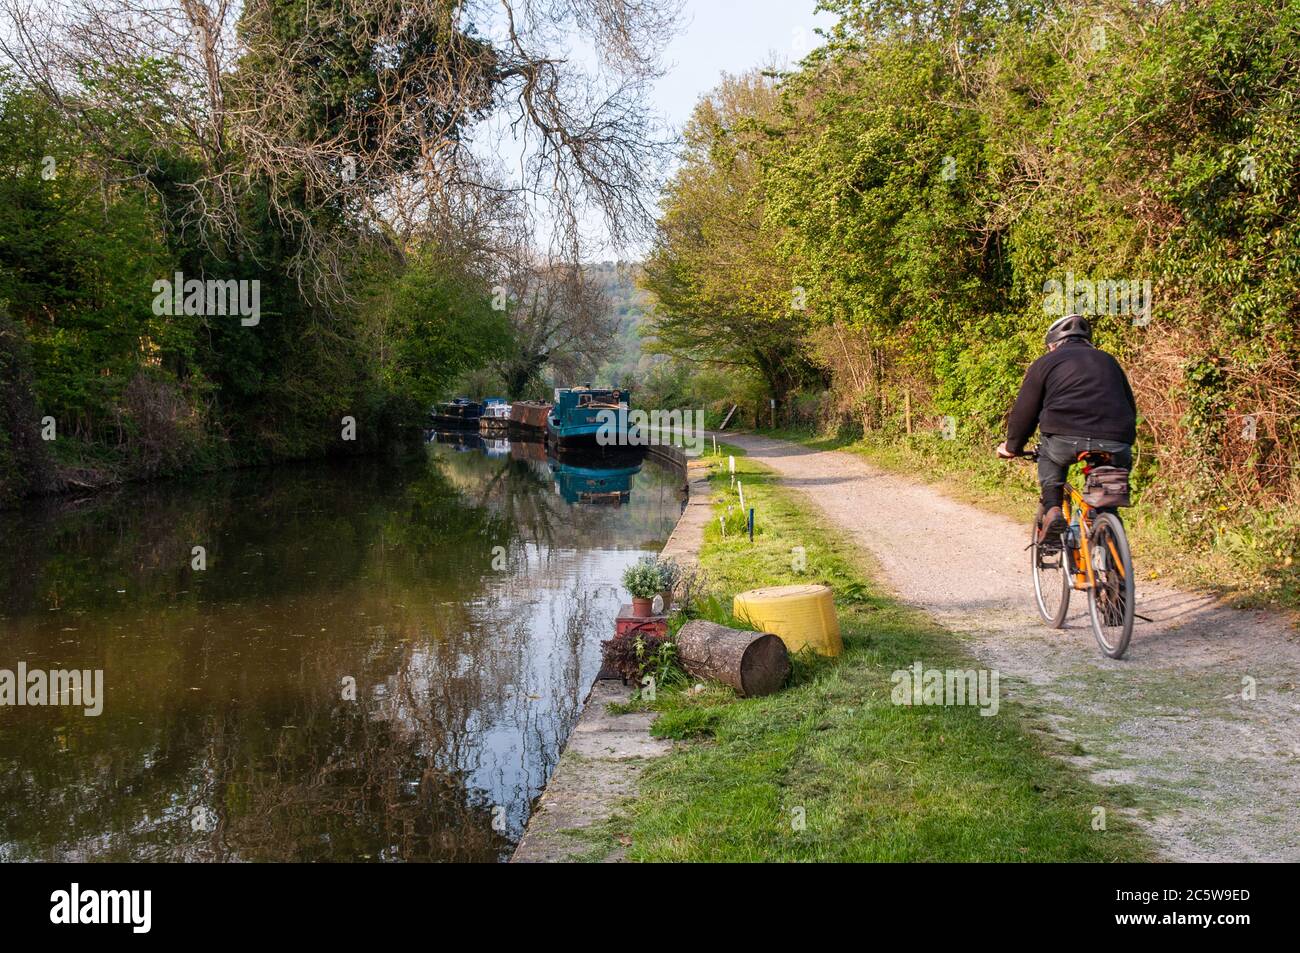 Bath, England - April 19, 2011: A cyclist passing boats on the Kennet & Avon Canal towpath near Bath in Somerset. Stock Photo